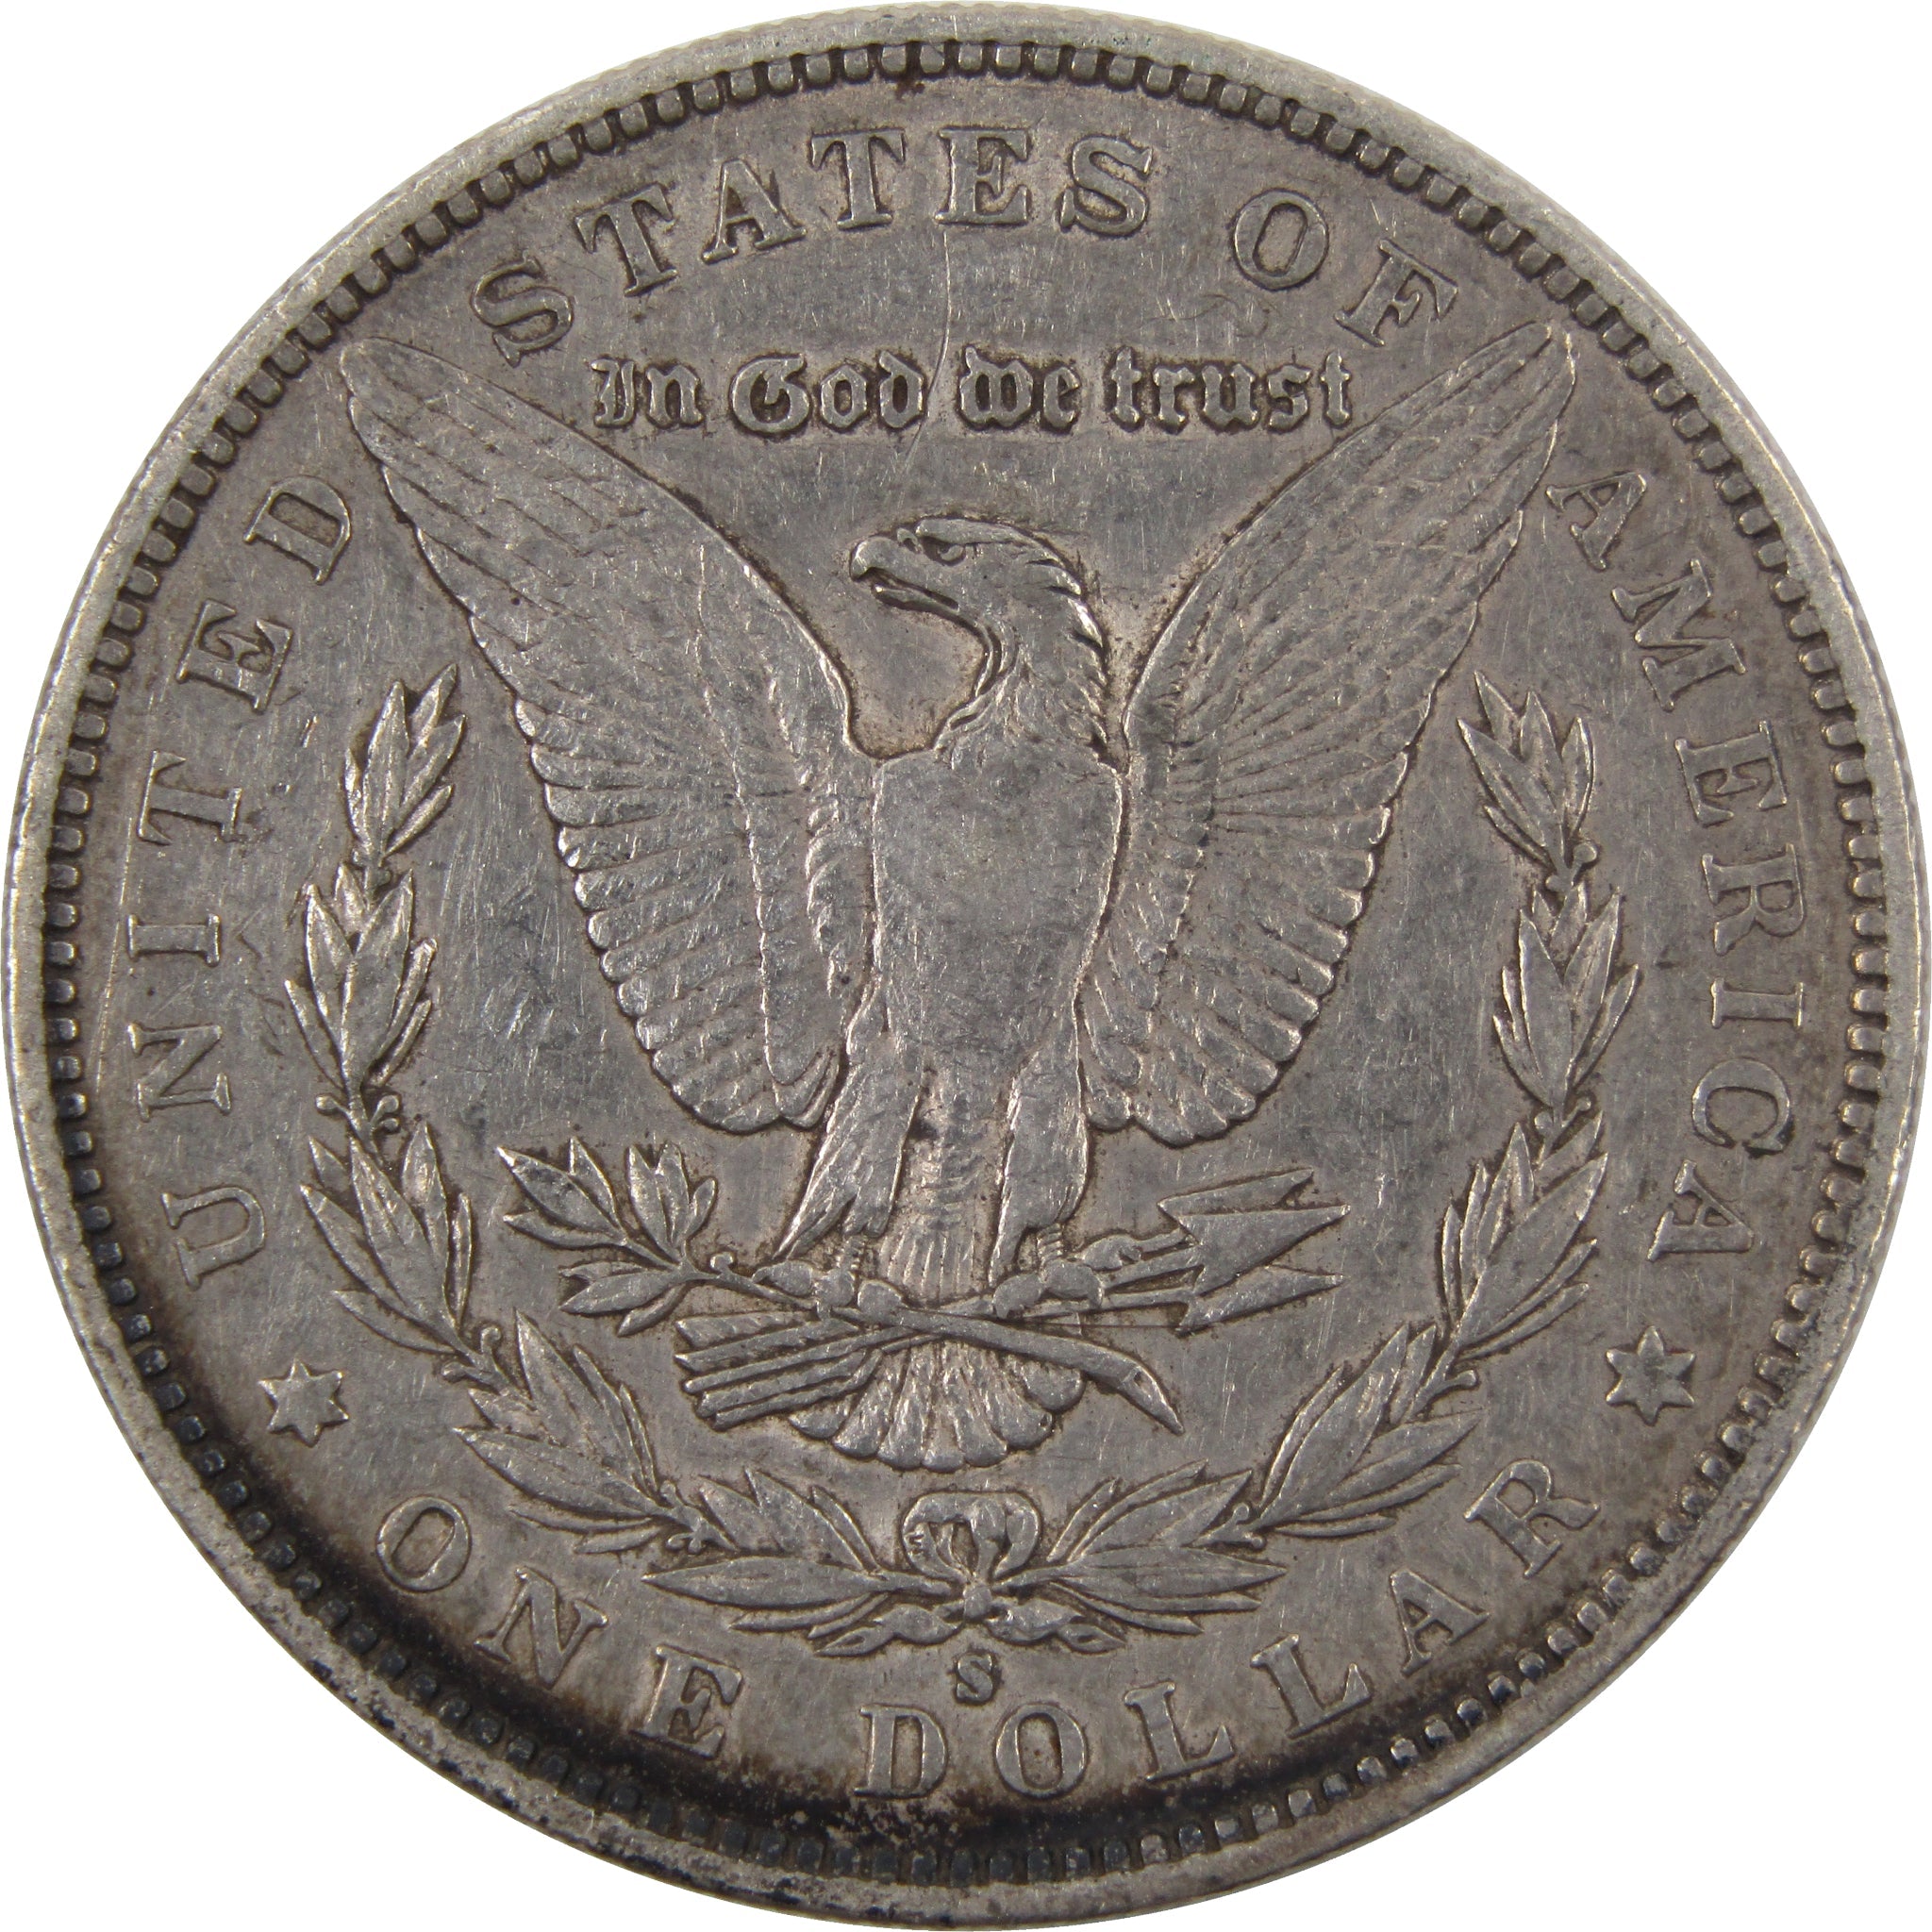 1892 S Morgan Dollar XF EF Extremely Fine Details 90% Silver SKU:I2444 - Morgan coin - Morgan silver dollar - Morgan silver dollar for sale - Profile Coins &amp; Collectibles